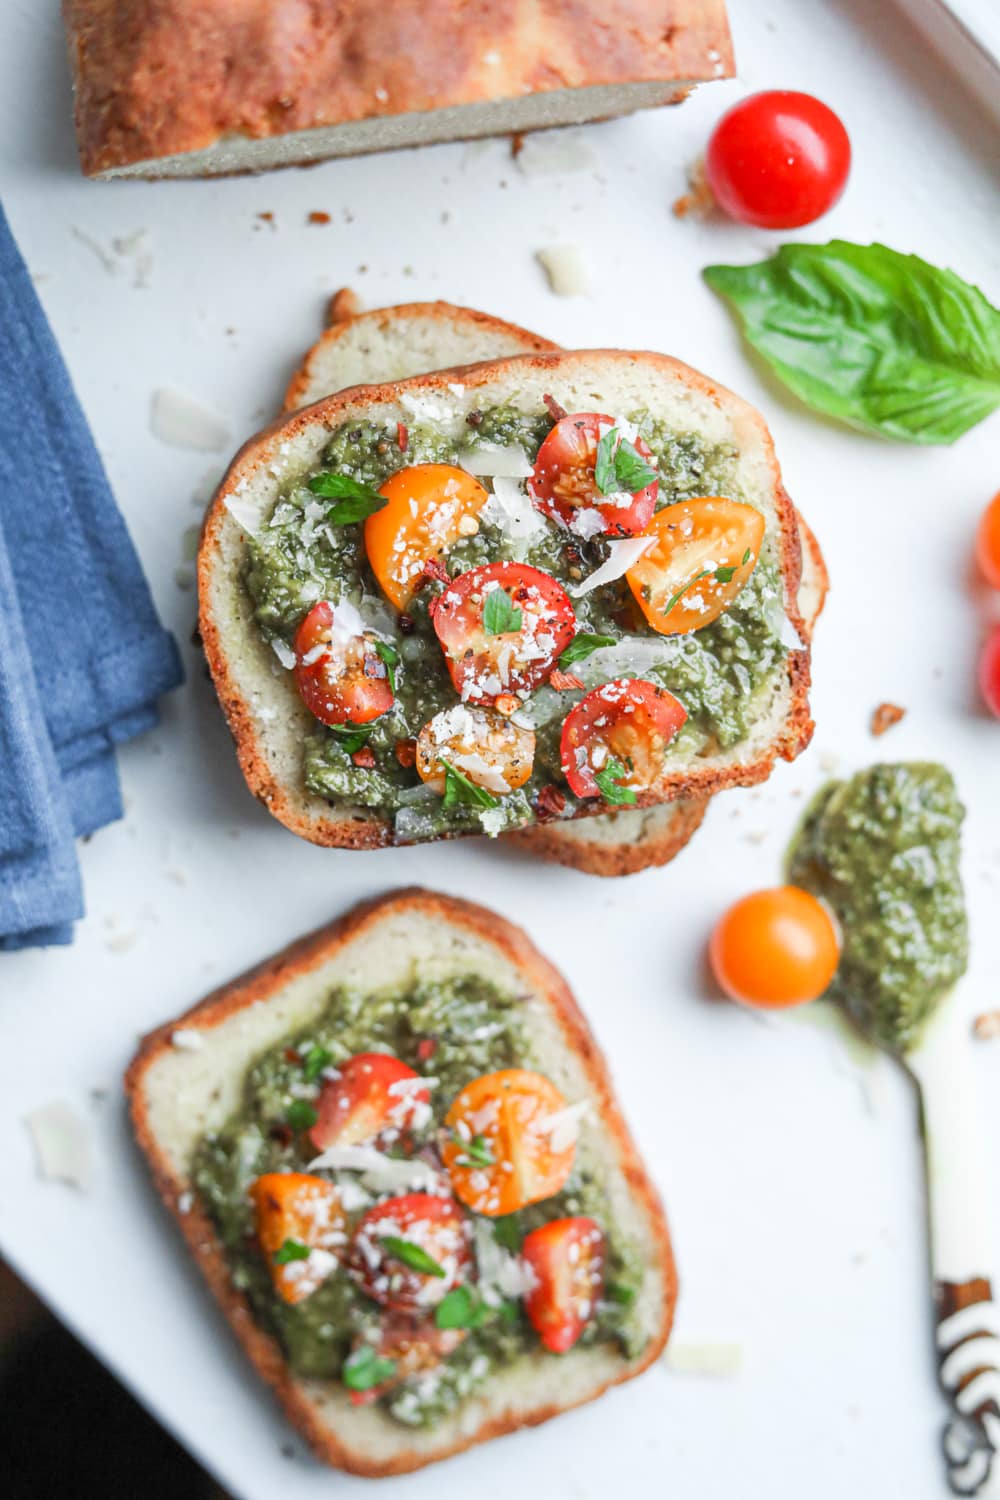 Slices of bread covered with pesto and tomatoes